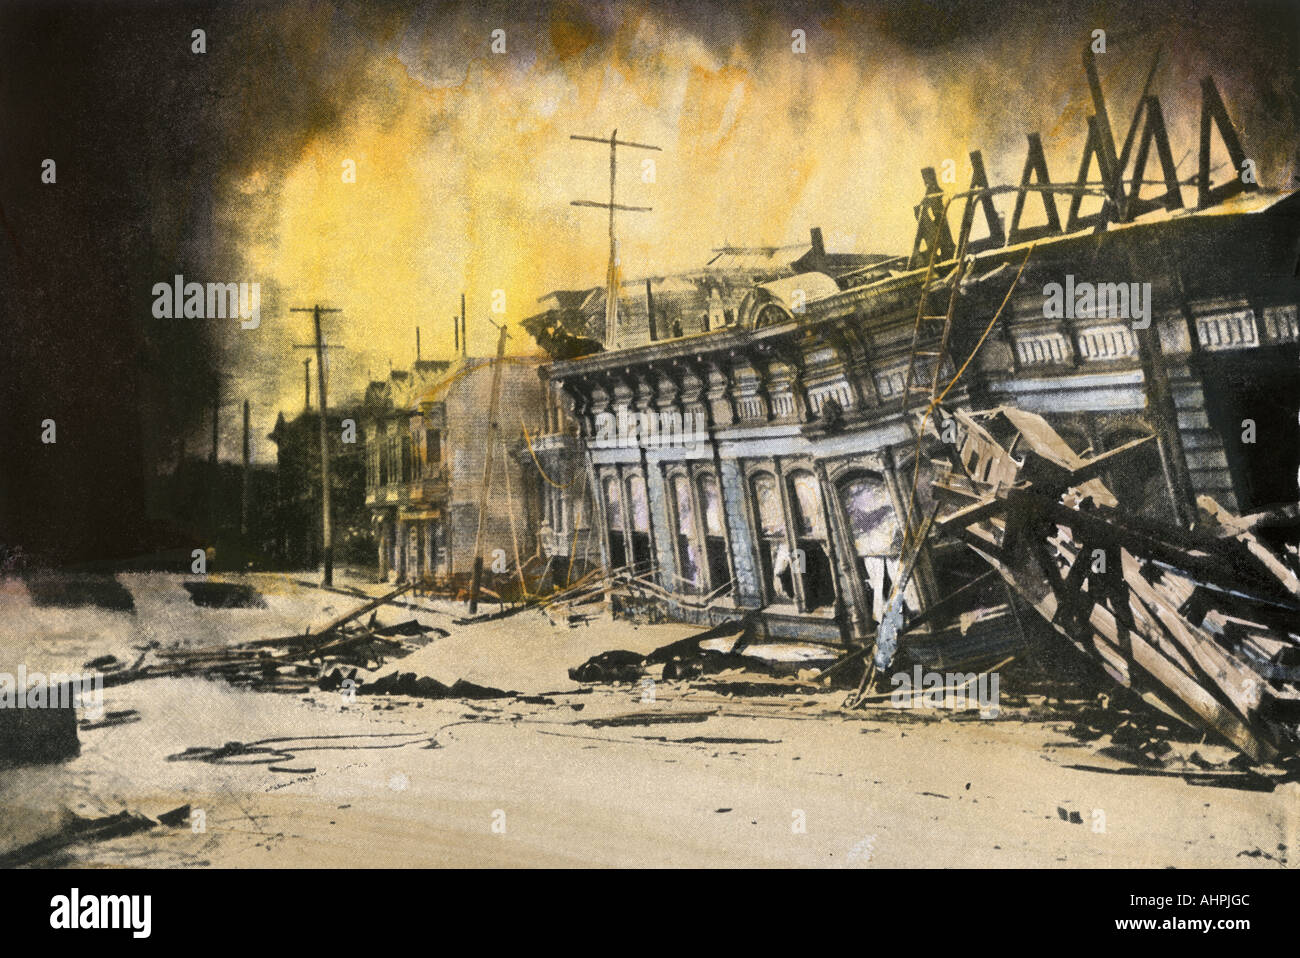 The Valencia Hotel where 75 persons were killed in the San Francisco earthquake of 1906. Hand-colored halftone of a photograph Stock Photo